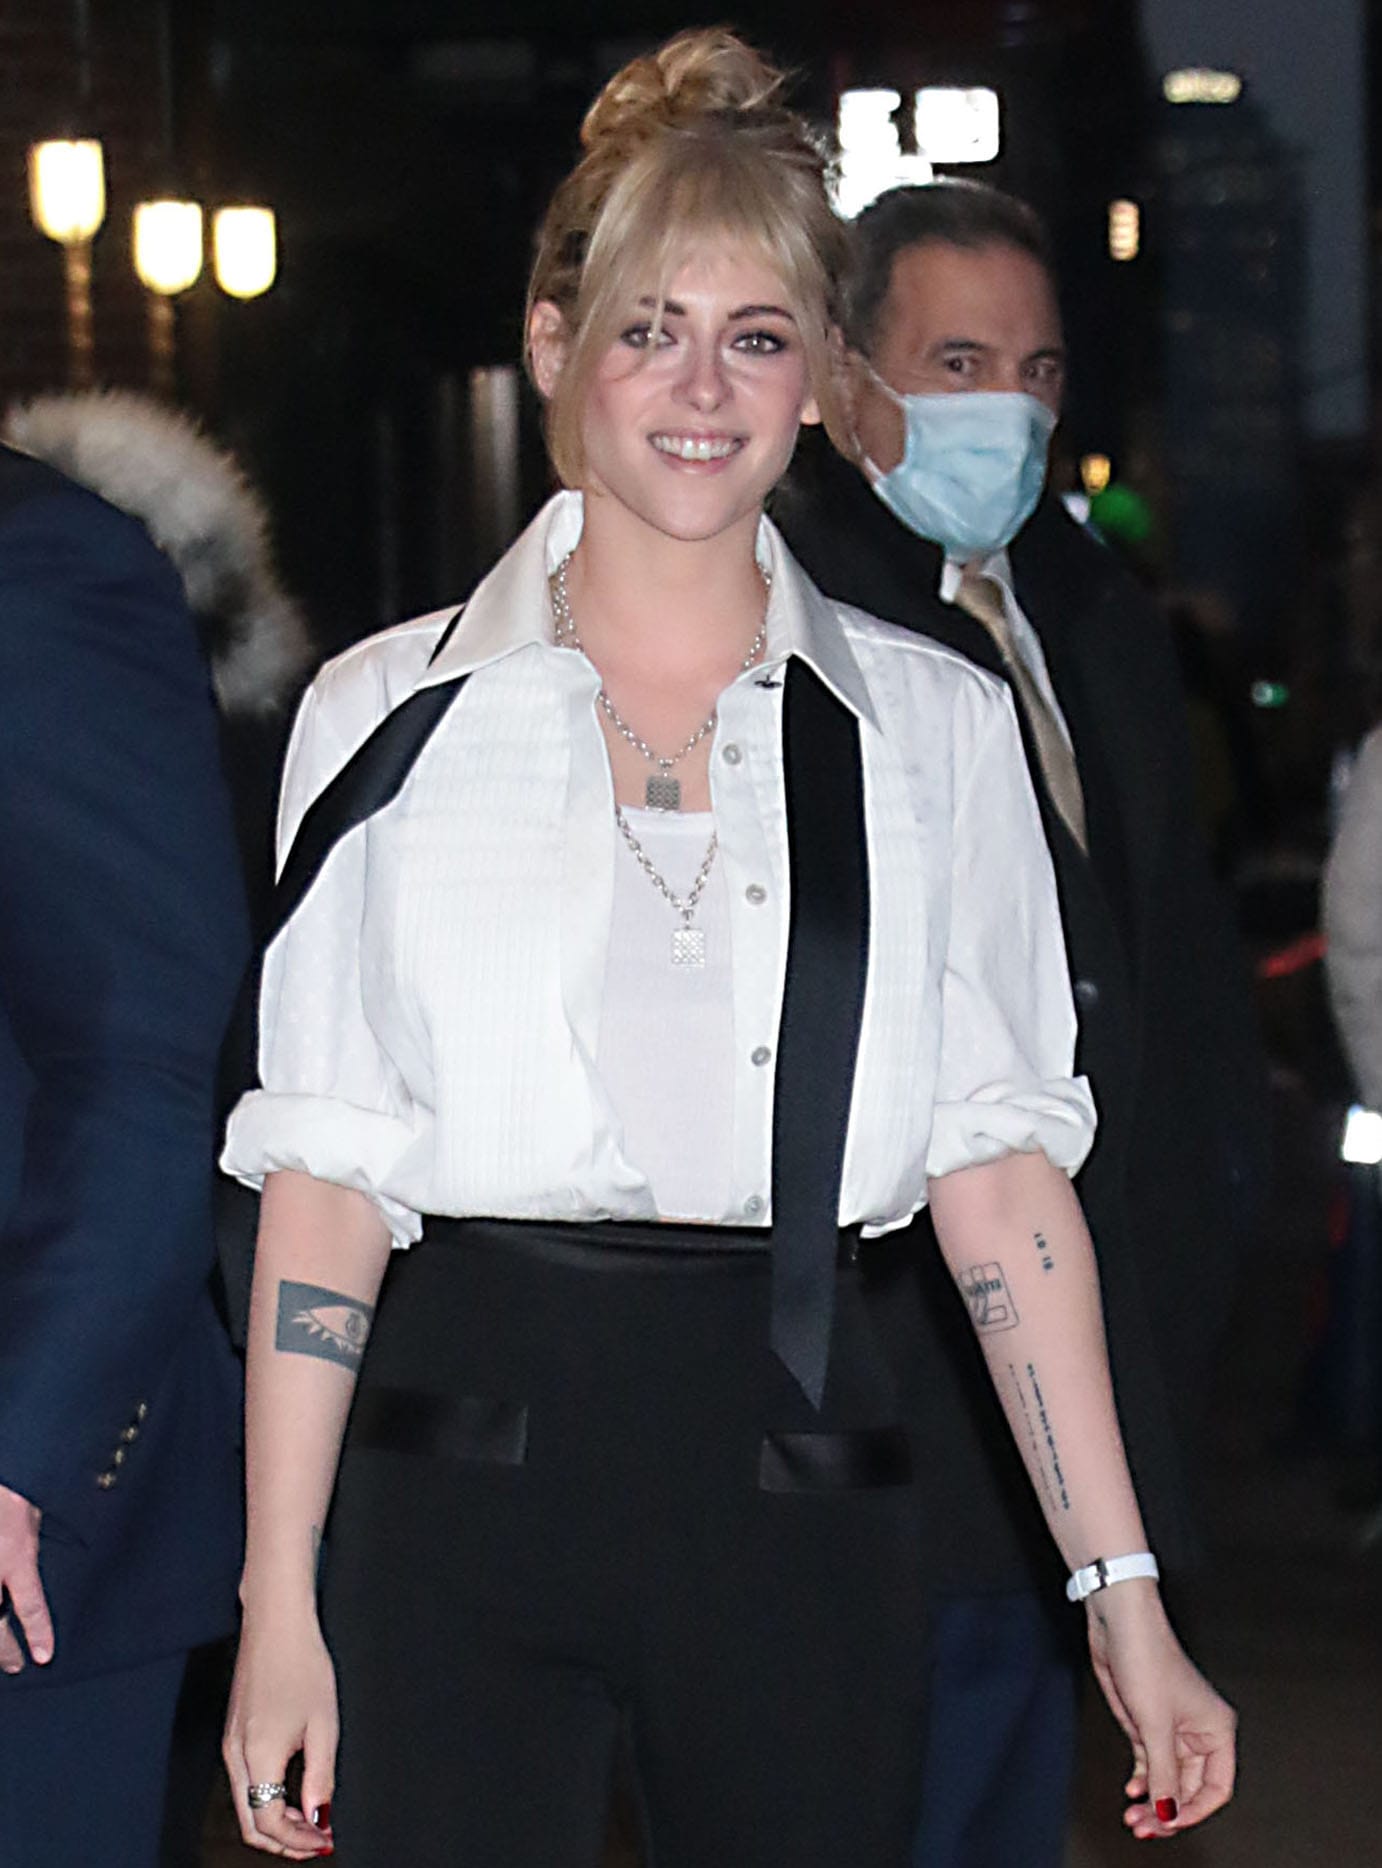 Kristen Stewart styles her hair in a messy updo and wears kohl-rimmed eyes with nude lipstick